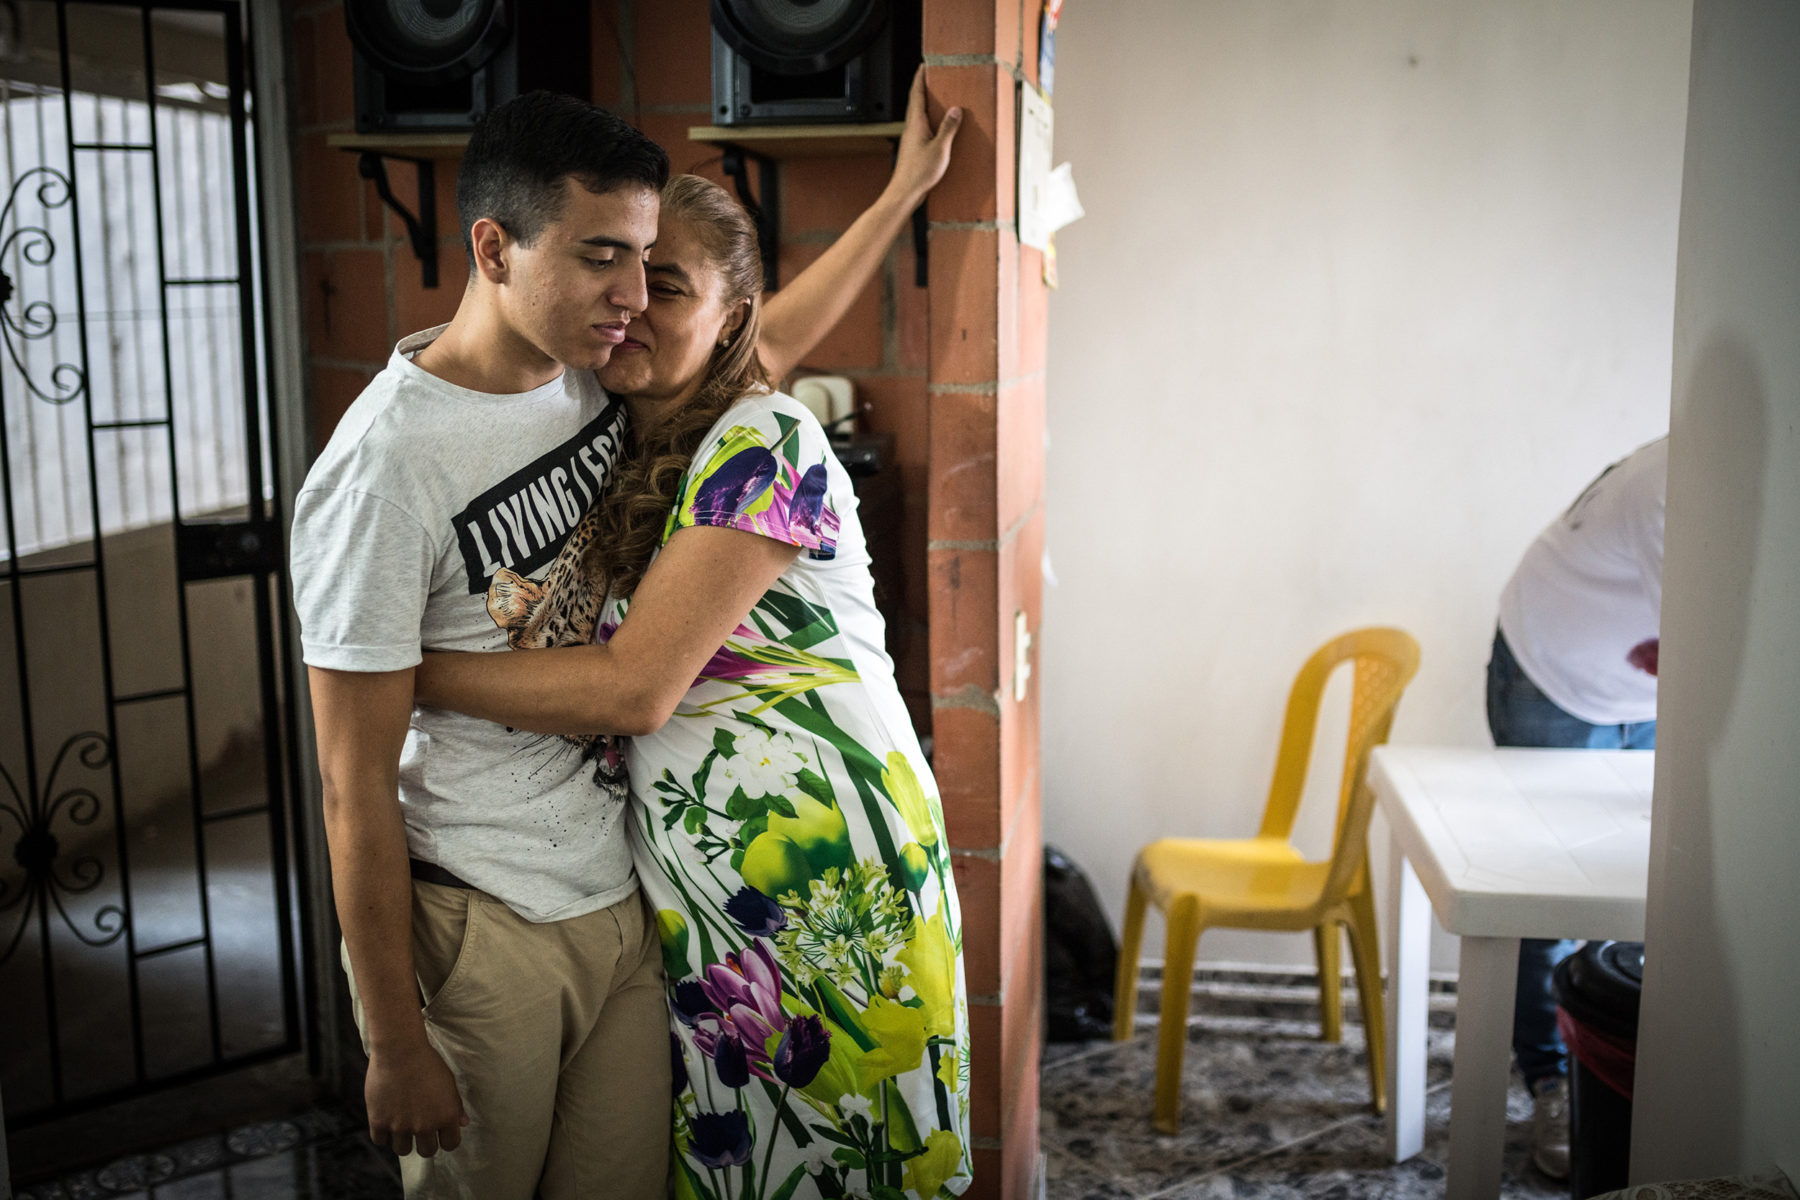 His mother Martha embraces her son. Daniel lives with his family high up on a steep slope of Medellín in a social settlement. He shares the room with his brother. The whole family is standing strong together so that Daniel's dream can come true.